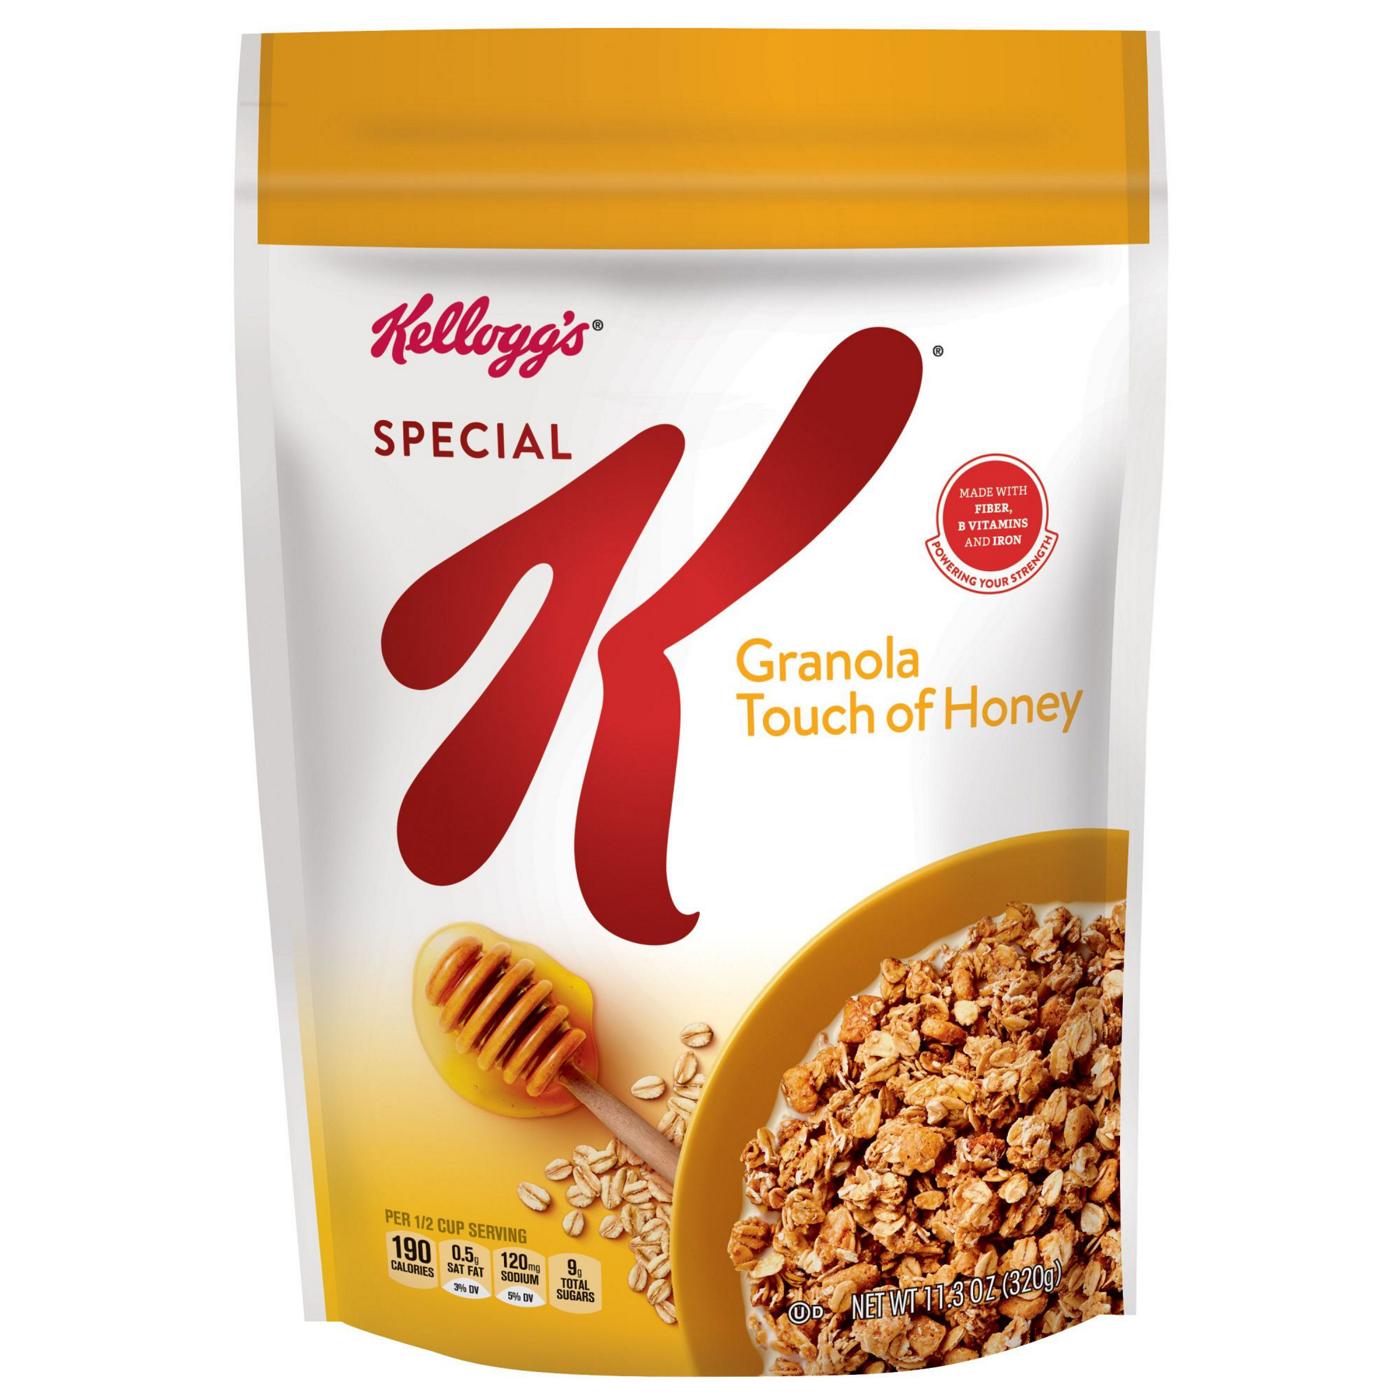 Kellogg's Special K Granola Touch of Honey; image 7 of 7